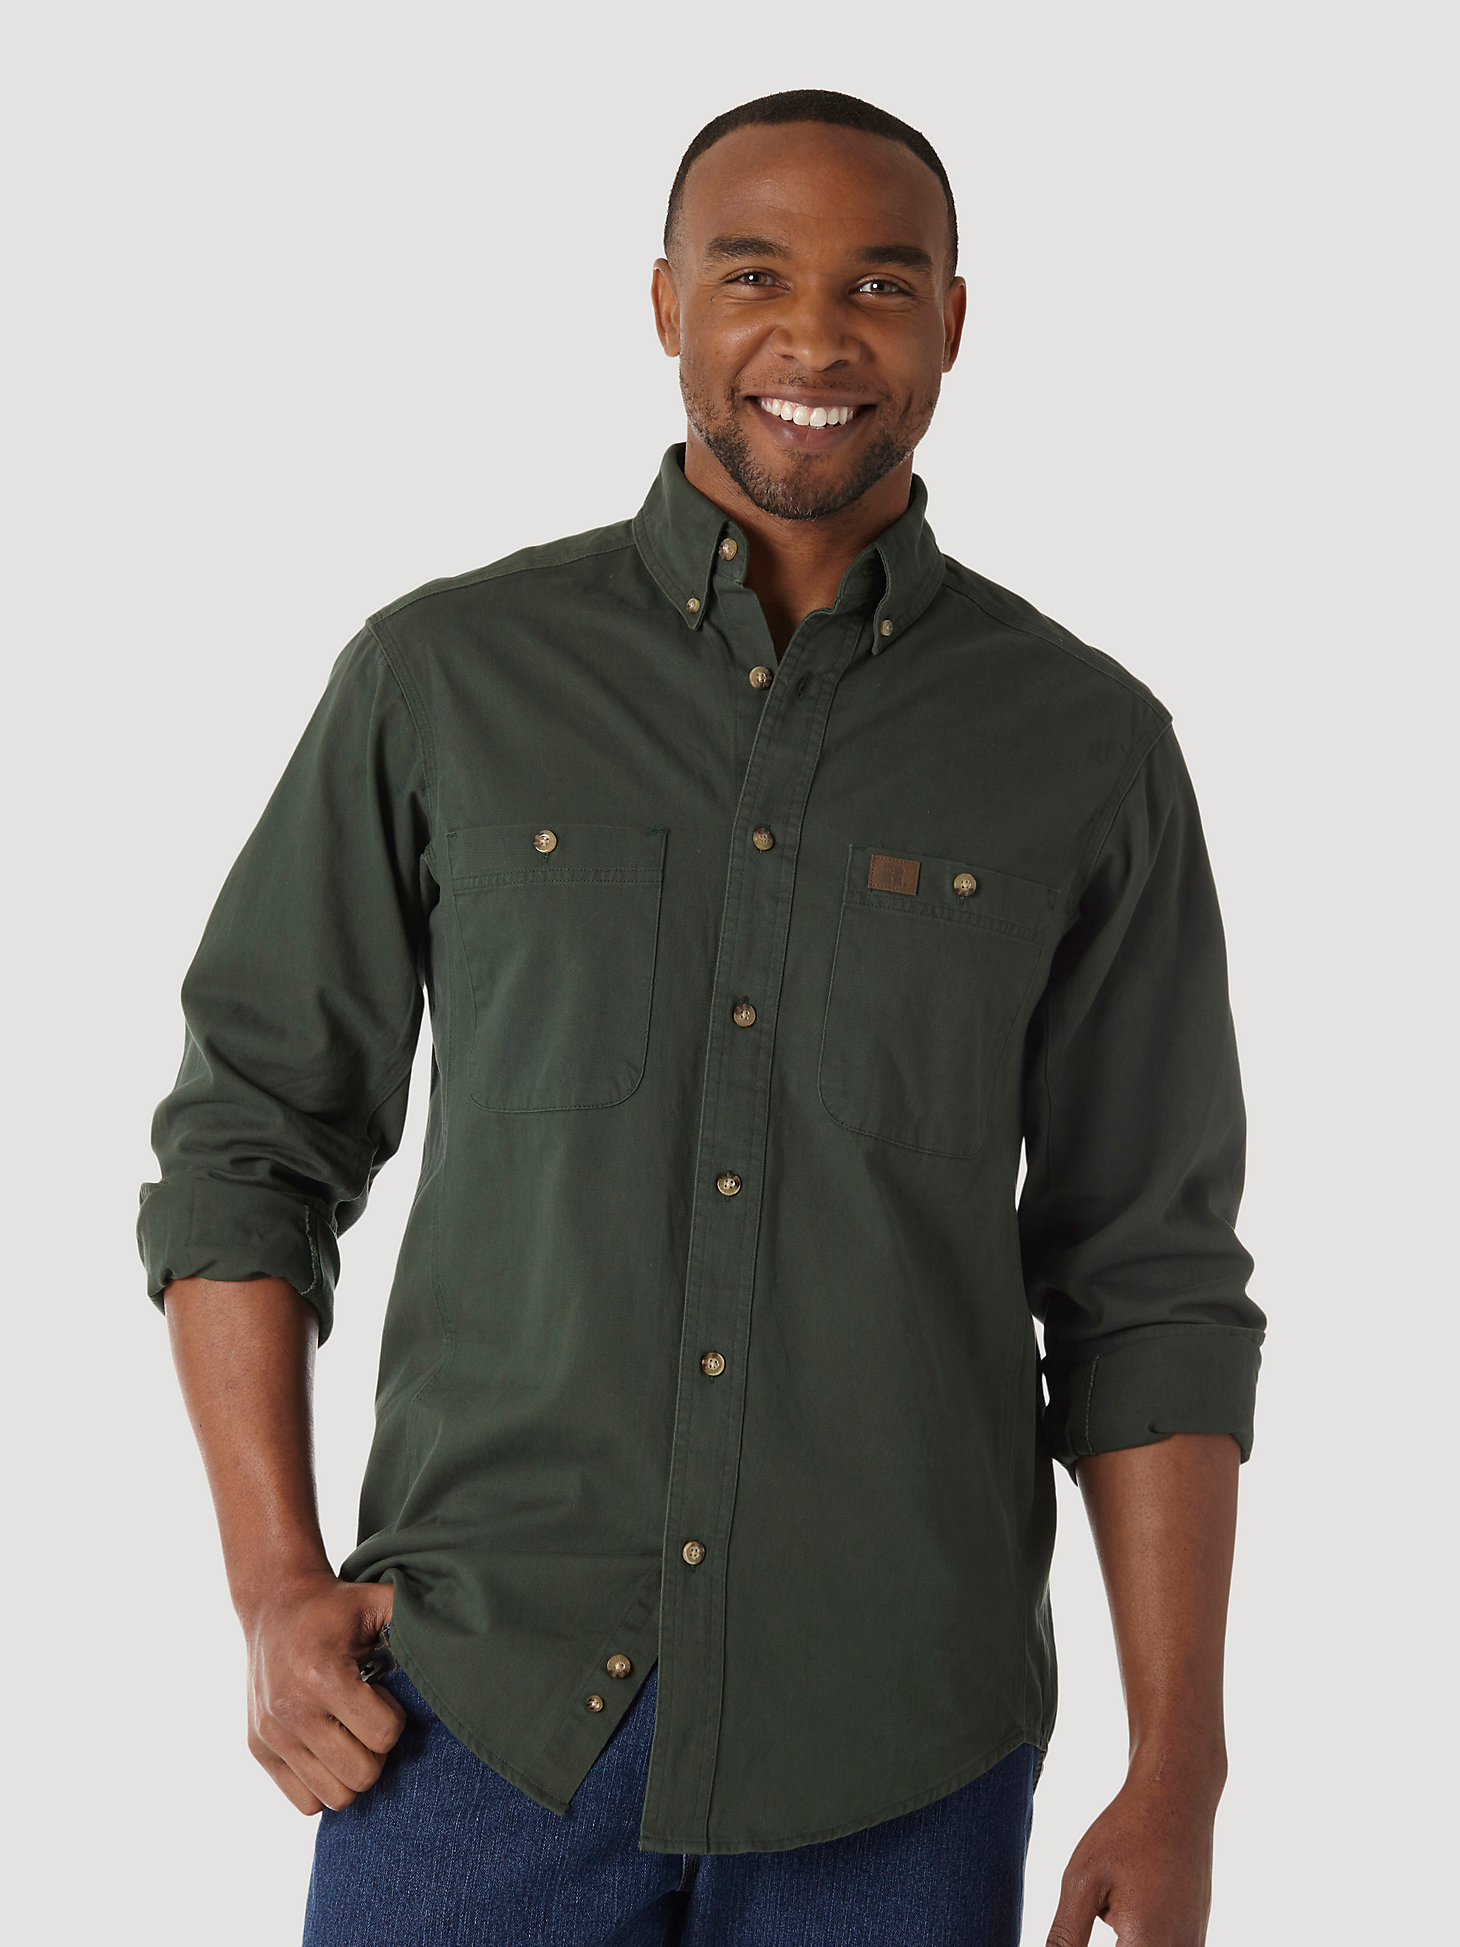 Wrangler® RIGGS Workwear® Long Sleeve Button Down Solid Twill Work Shirt in Forest Green alternative view 1